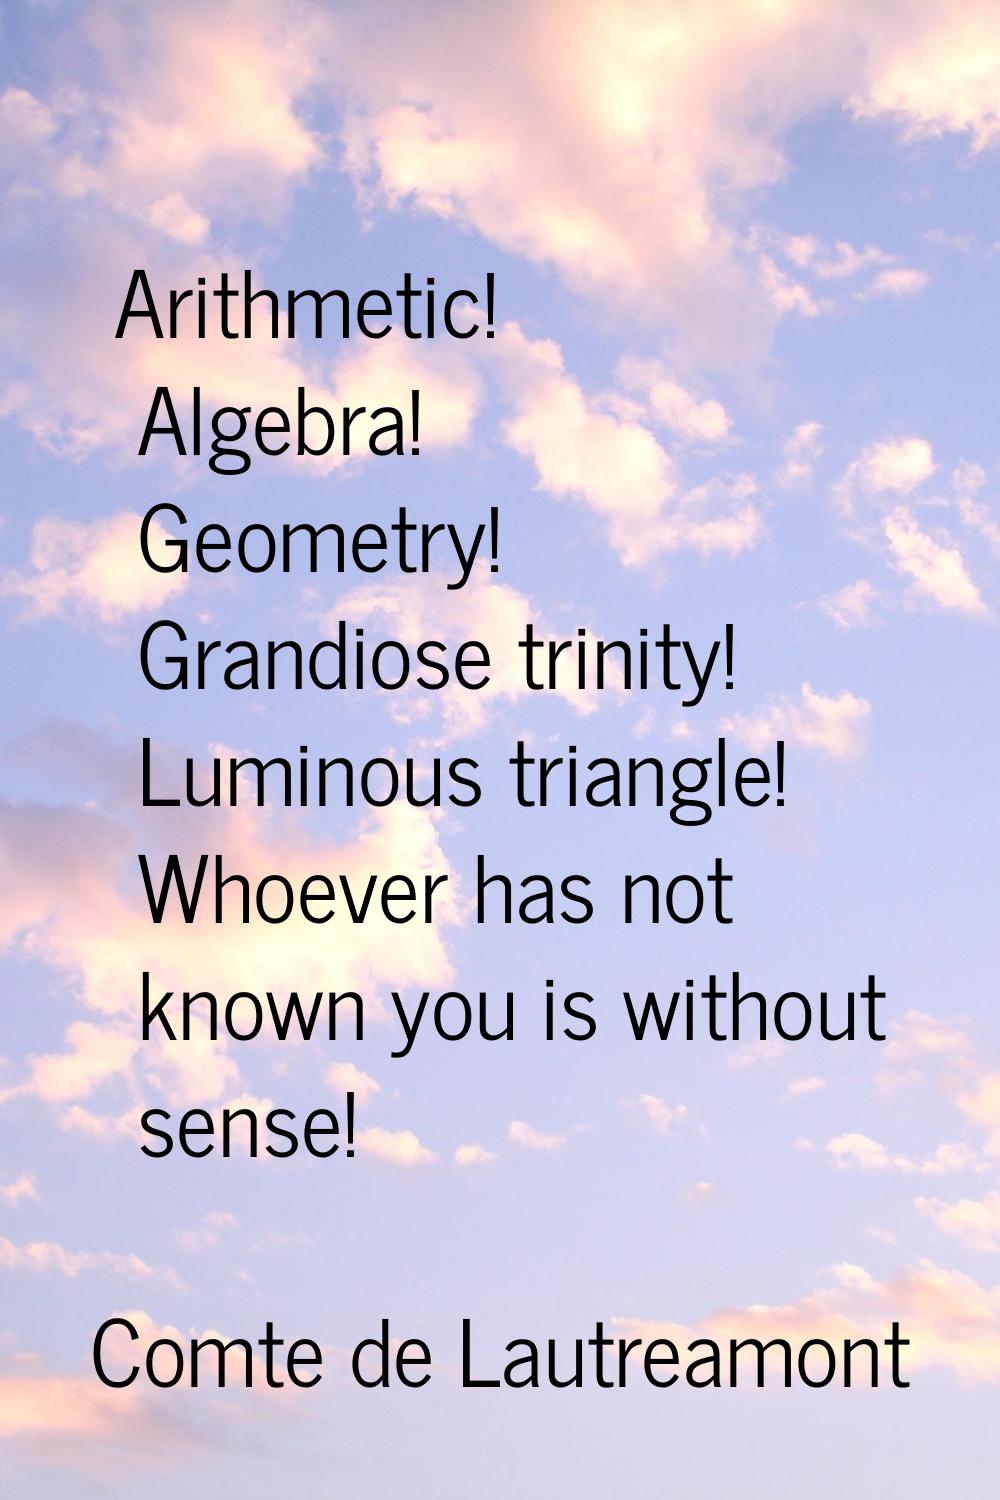 Arithmetic! Algebra! Geometry! Grandiose trinity! Luminous triangle! Whoever has not known you is w